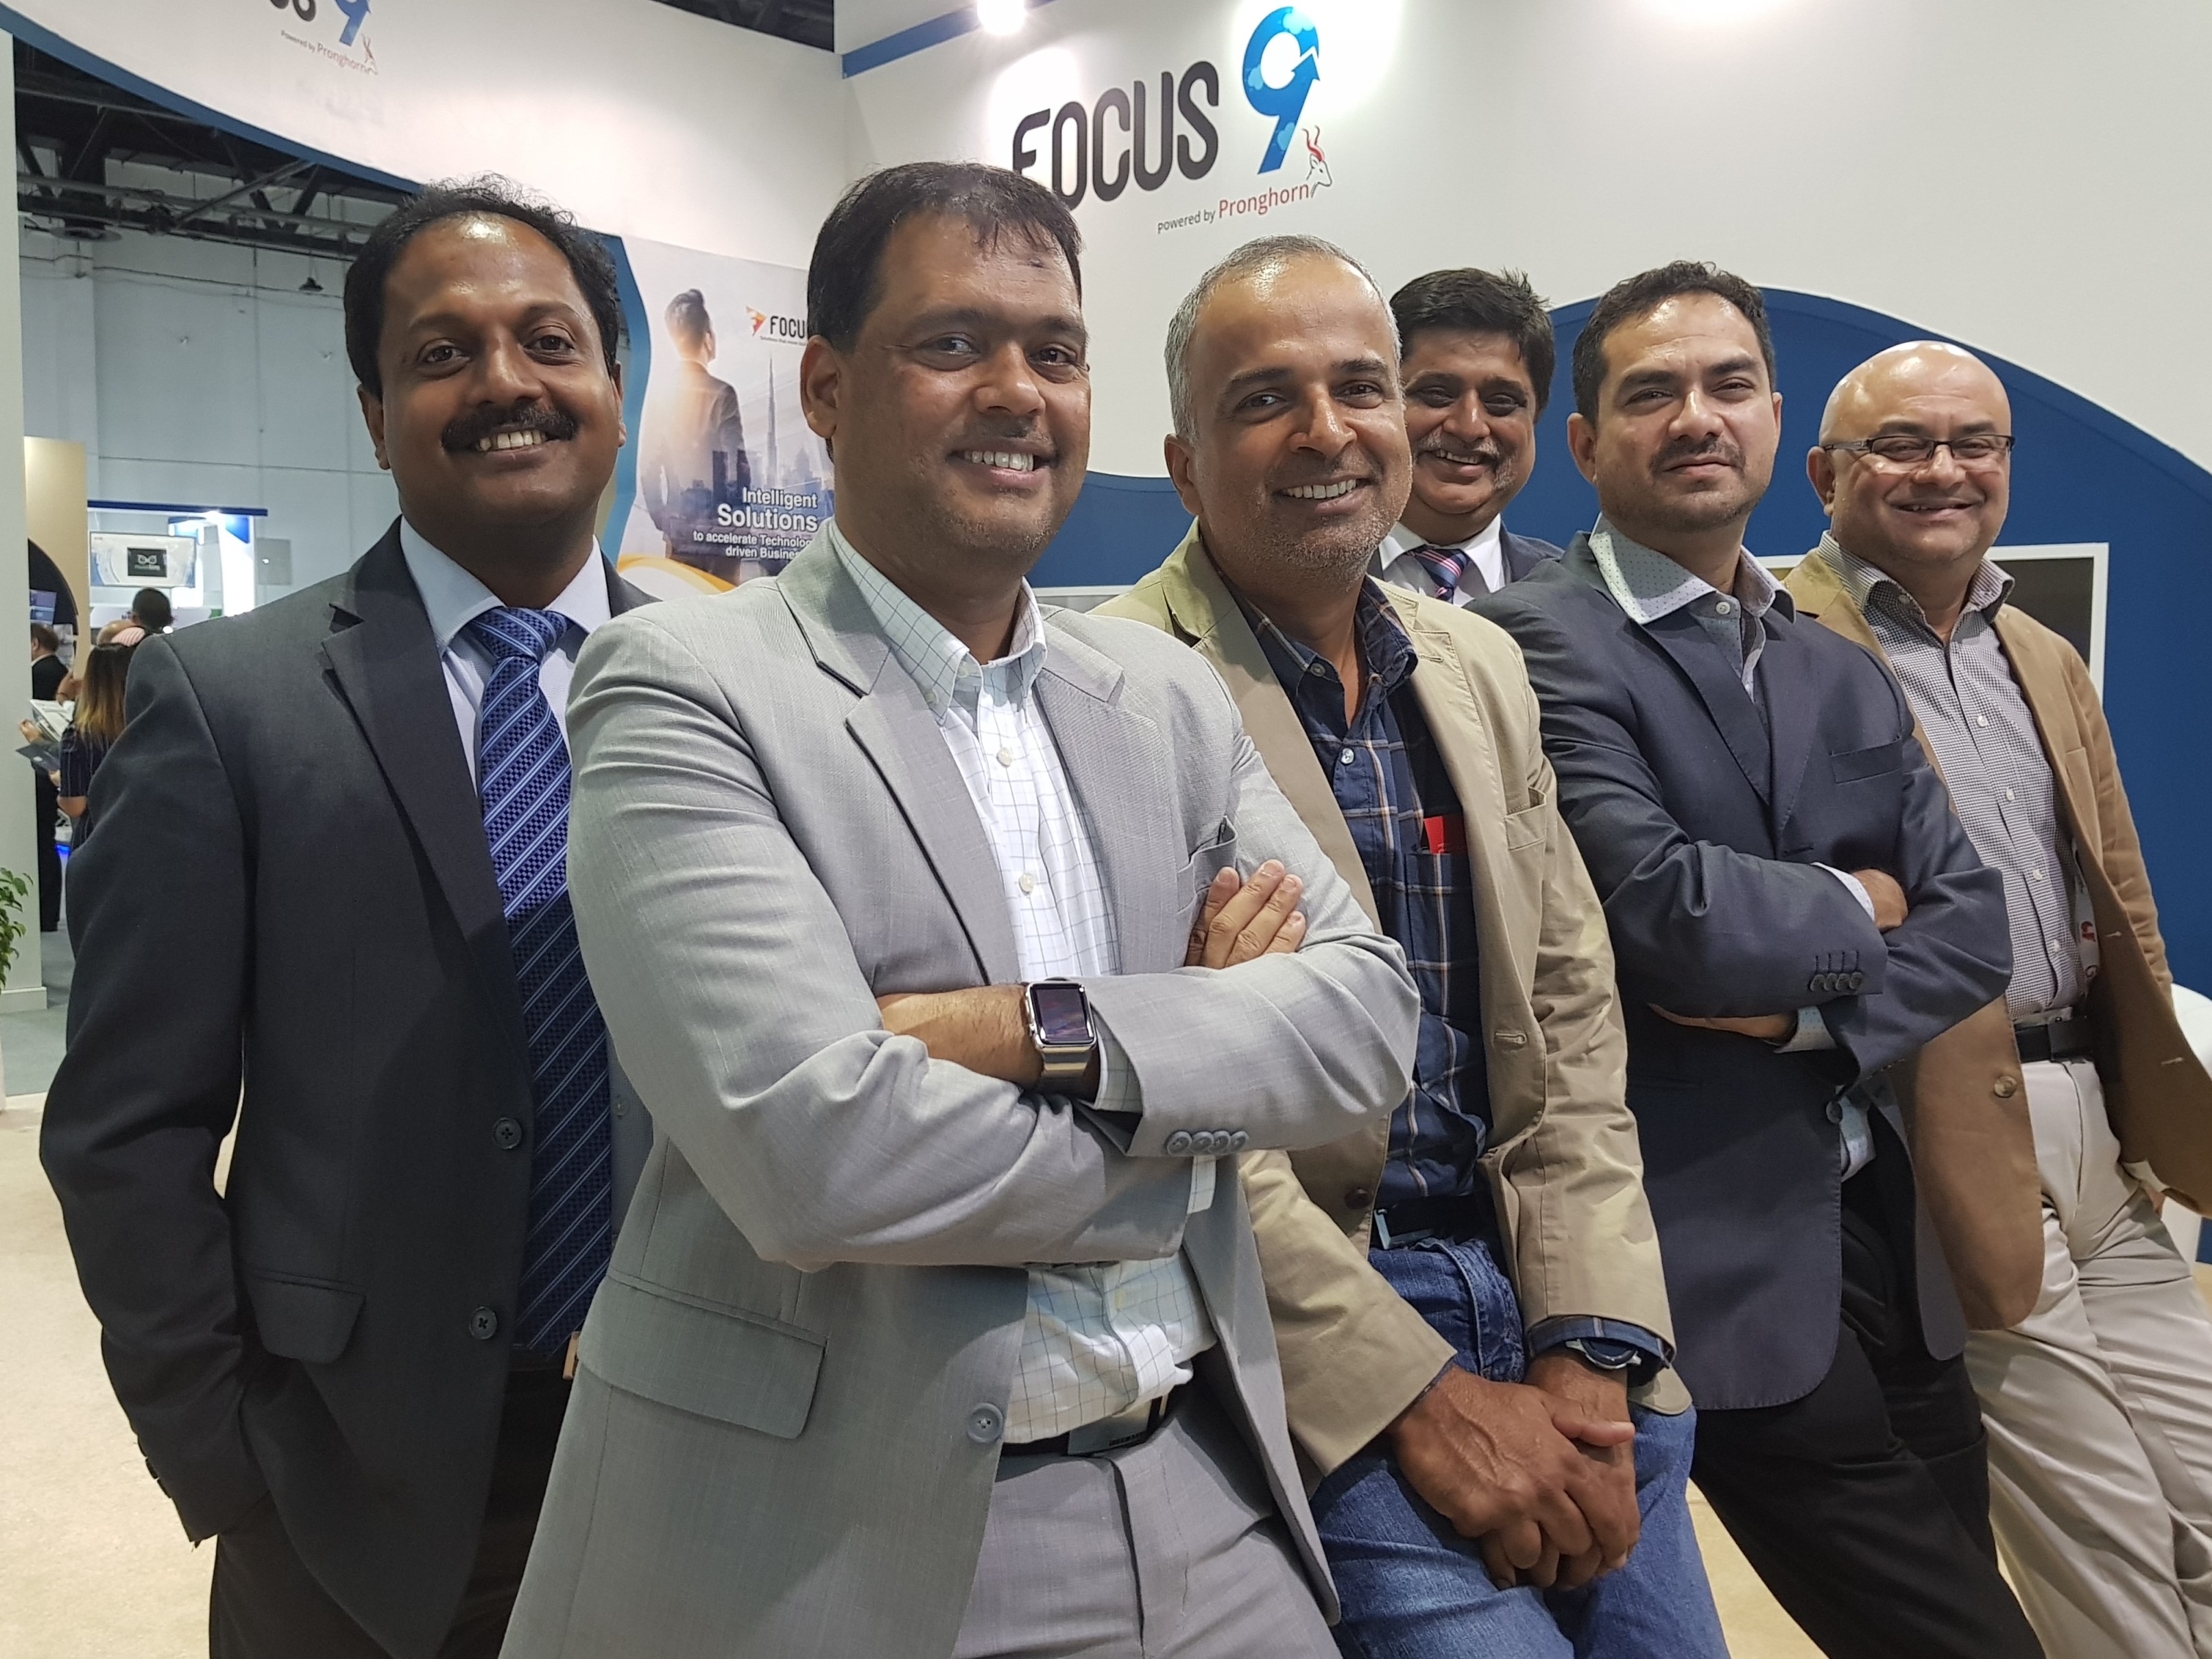 Focus Softnet launches Focus 9 in the  Middle East and Africa